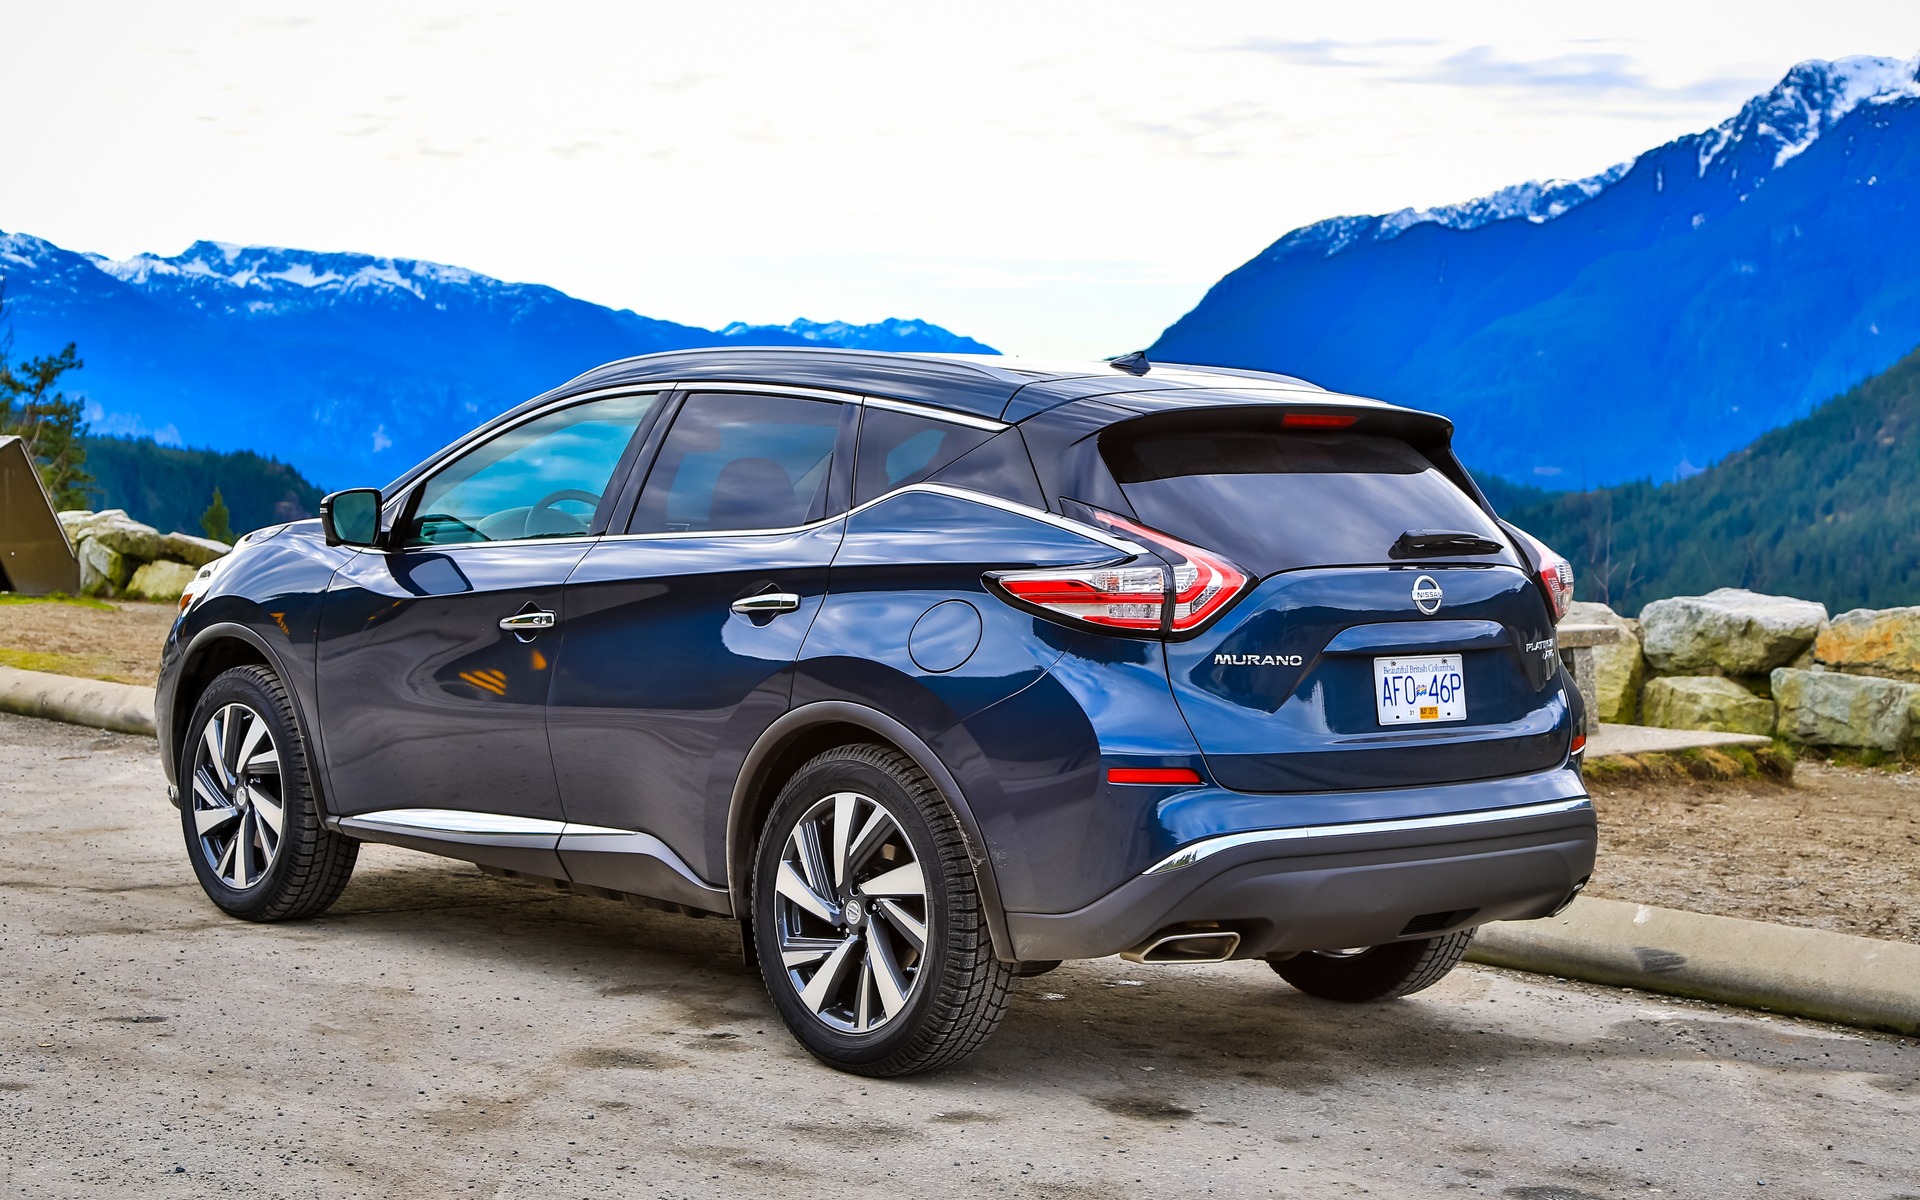 Nissan murano models differences #9